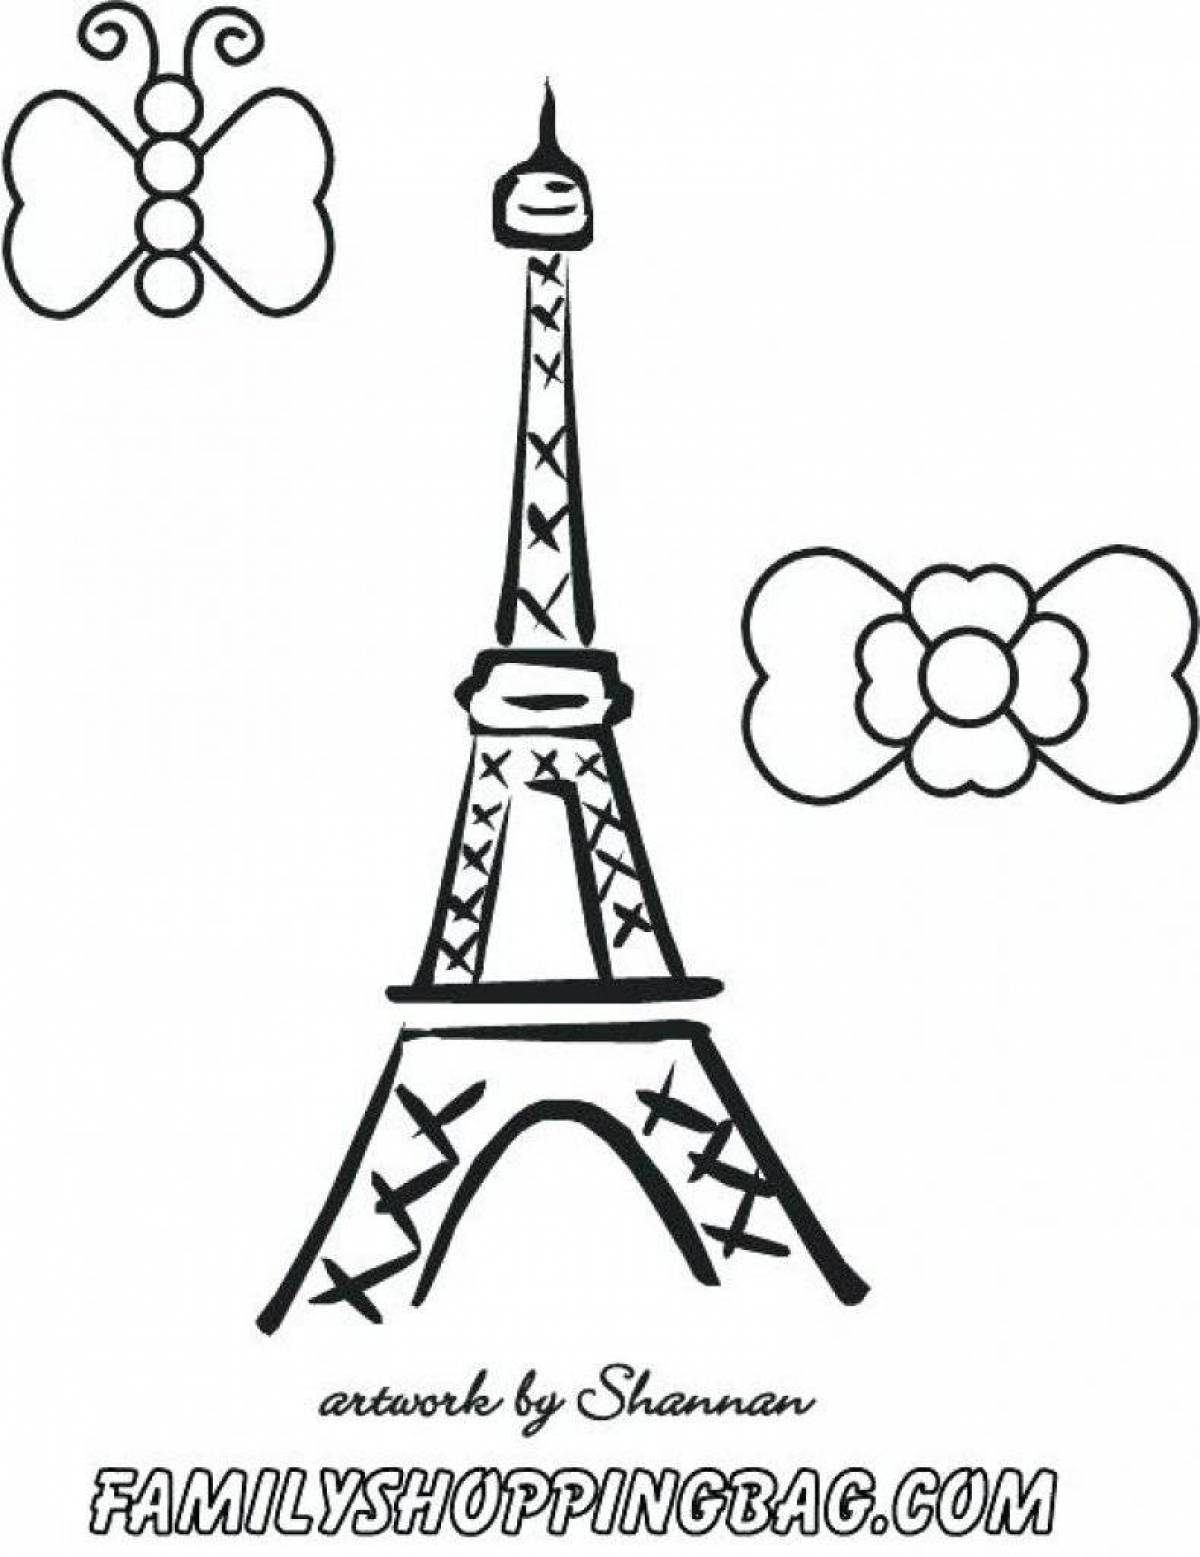 Glowing eiffel tower coloring page